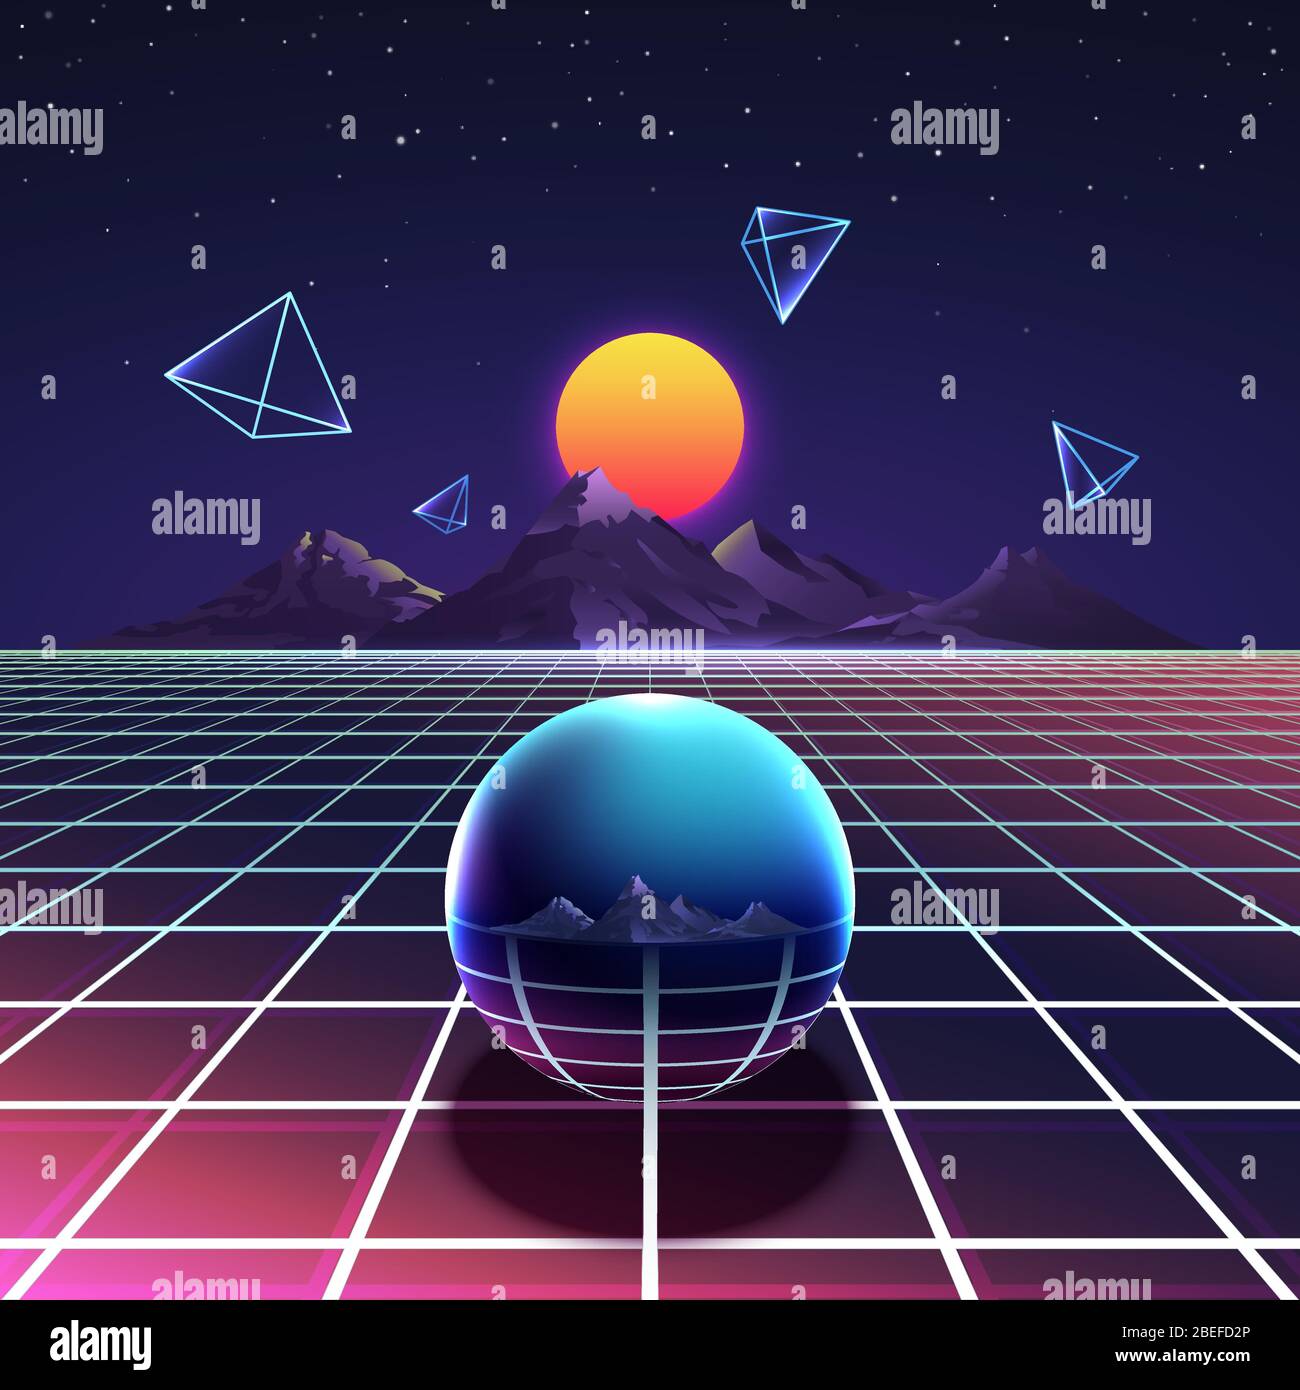 Retro vibrant futuristic synth night vector poster in nostalgia 80s style with mountains, abstract pyramids and metal sphere. Cyberspace digital and illumination grid glowing surface illustration Stock Vector